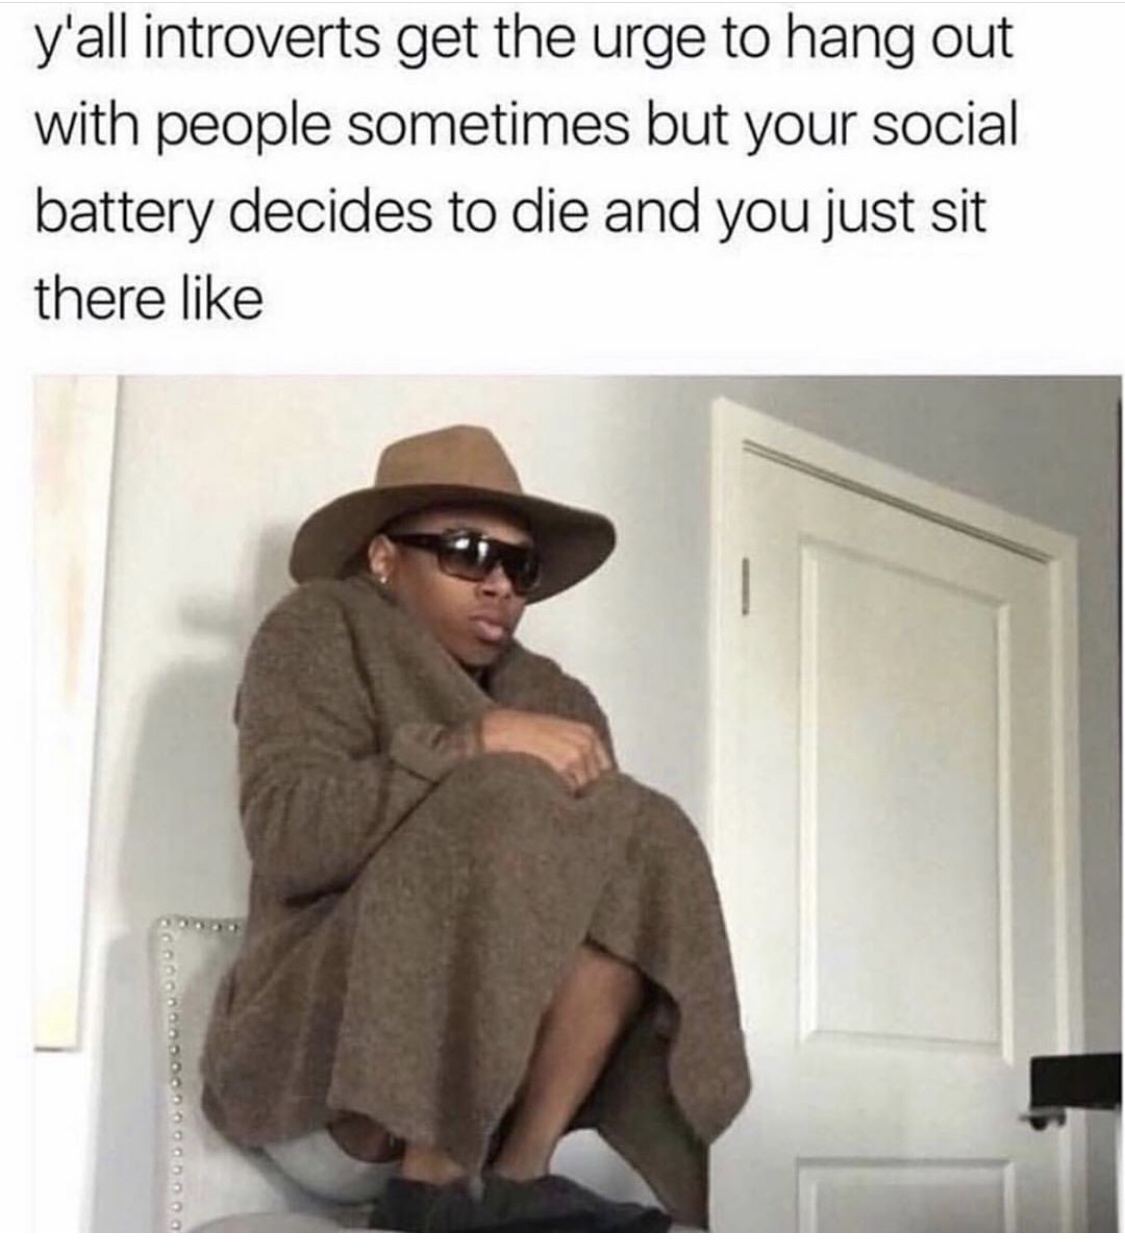 introvert social battery meme - y'all introverts get the urge to hang out with people sometimes but your social battery decides to die and you just sit there